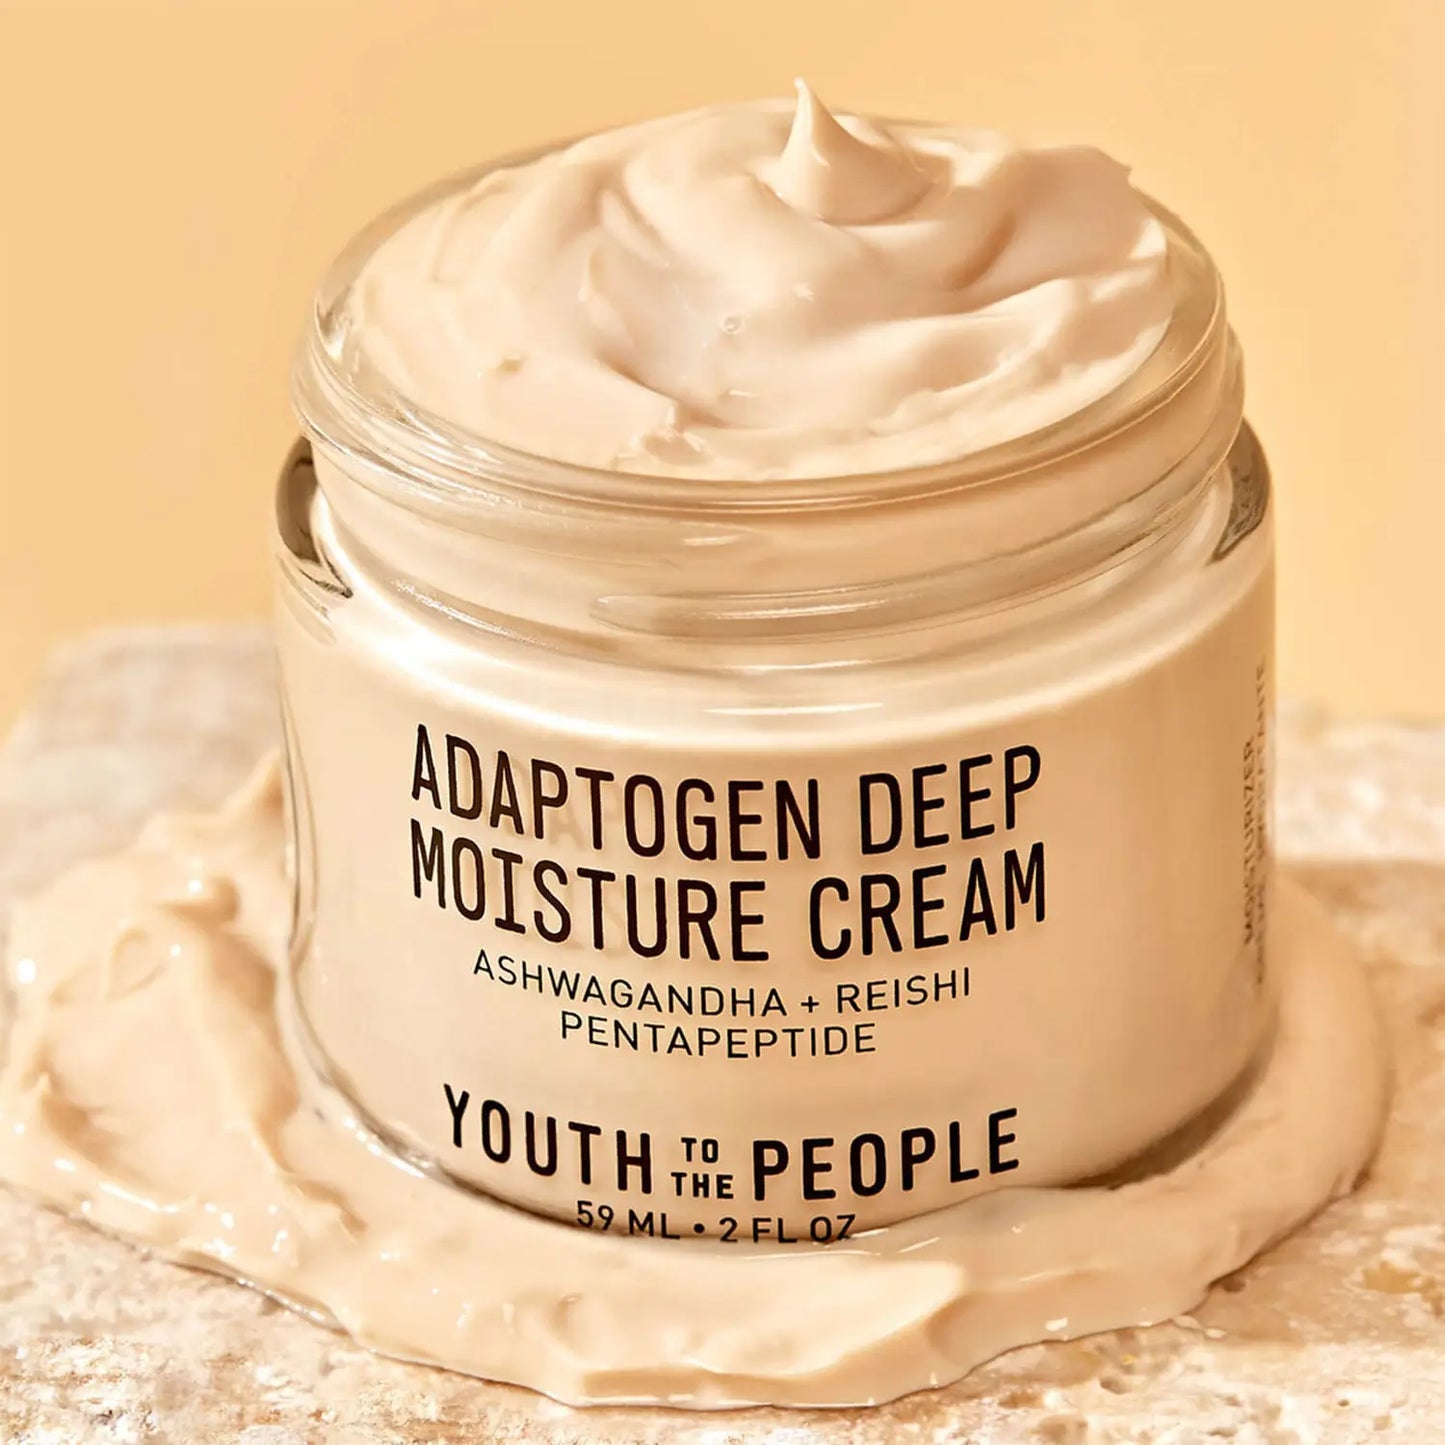 YOUTH TO THE PEOPLE | ADAPTOGEN DEEP MOISTURE CREAM